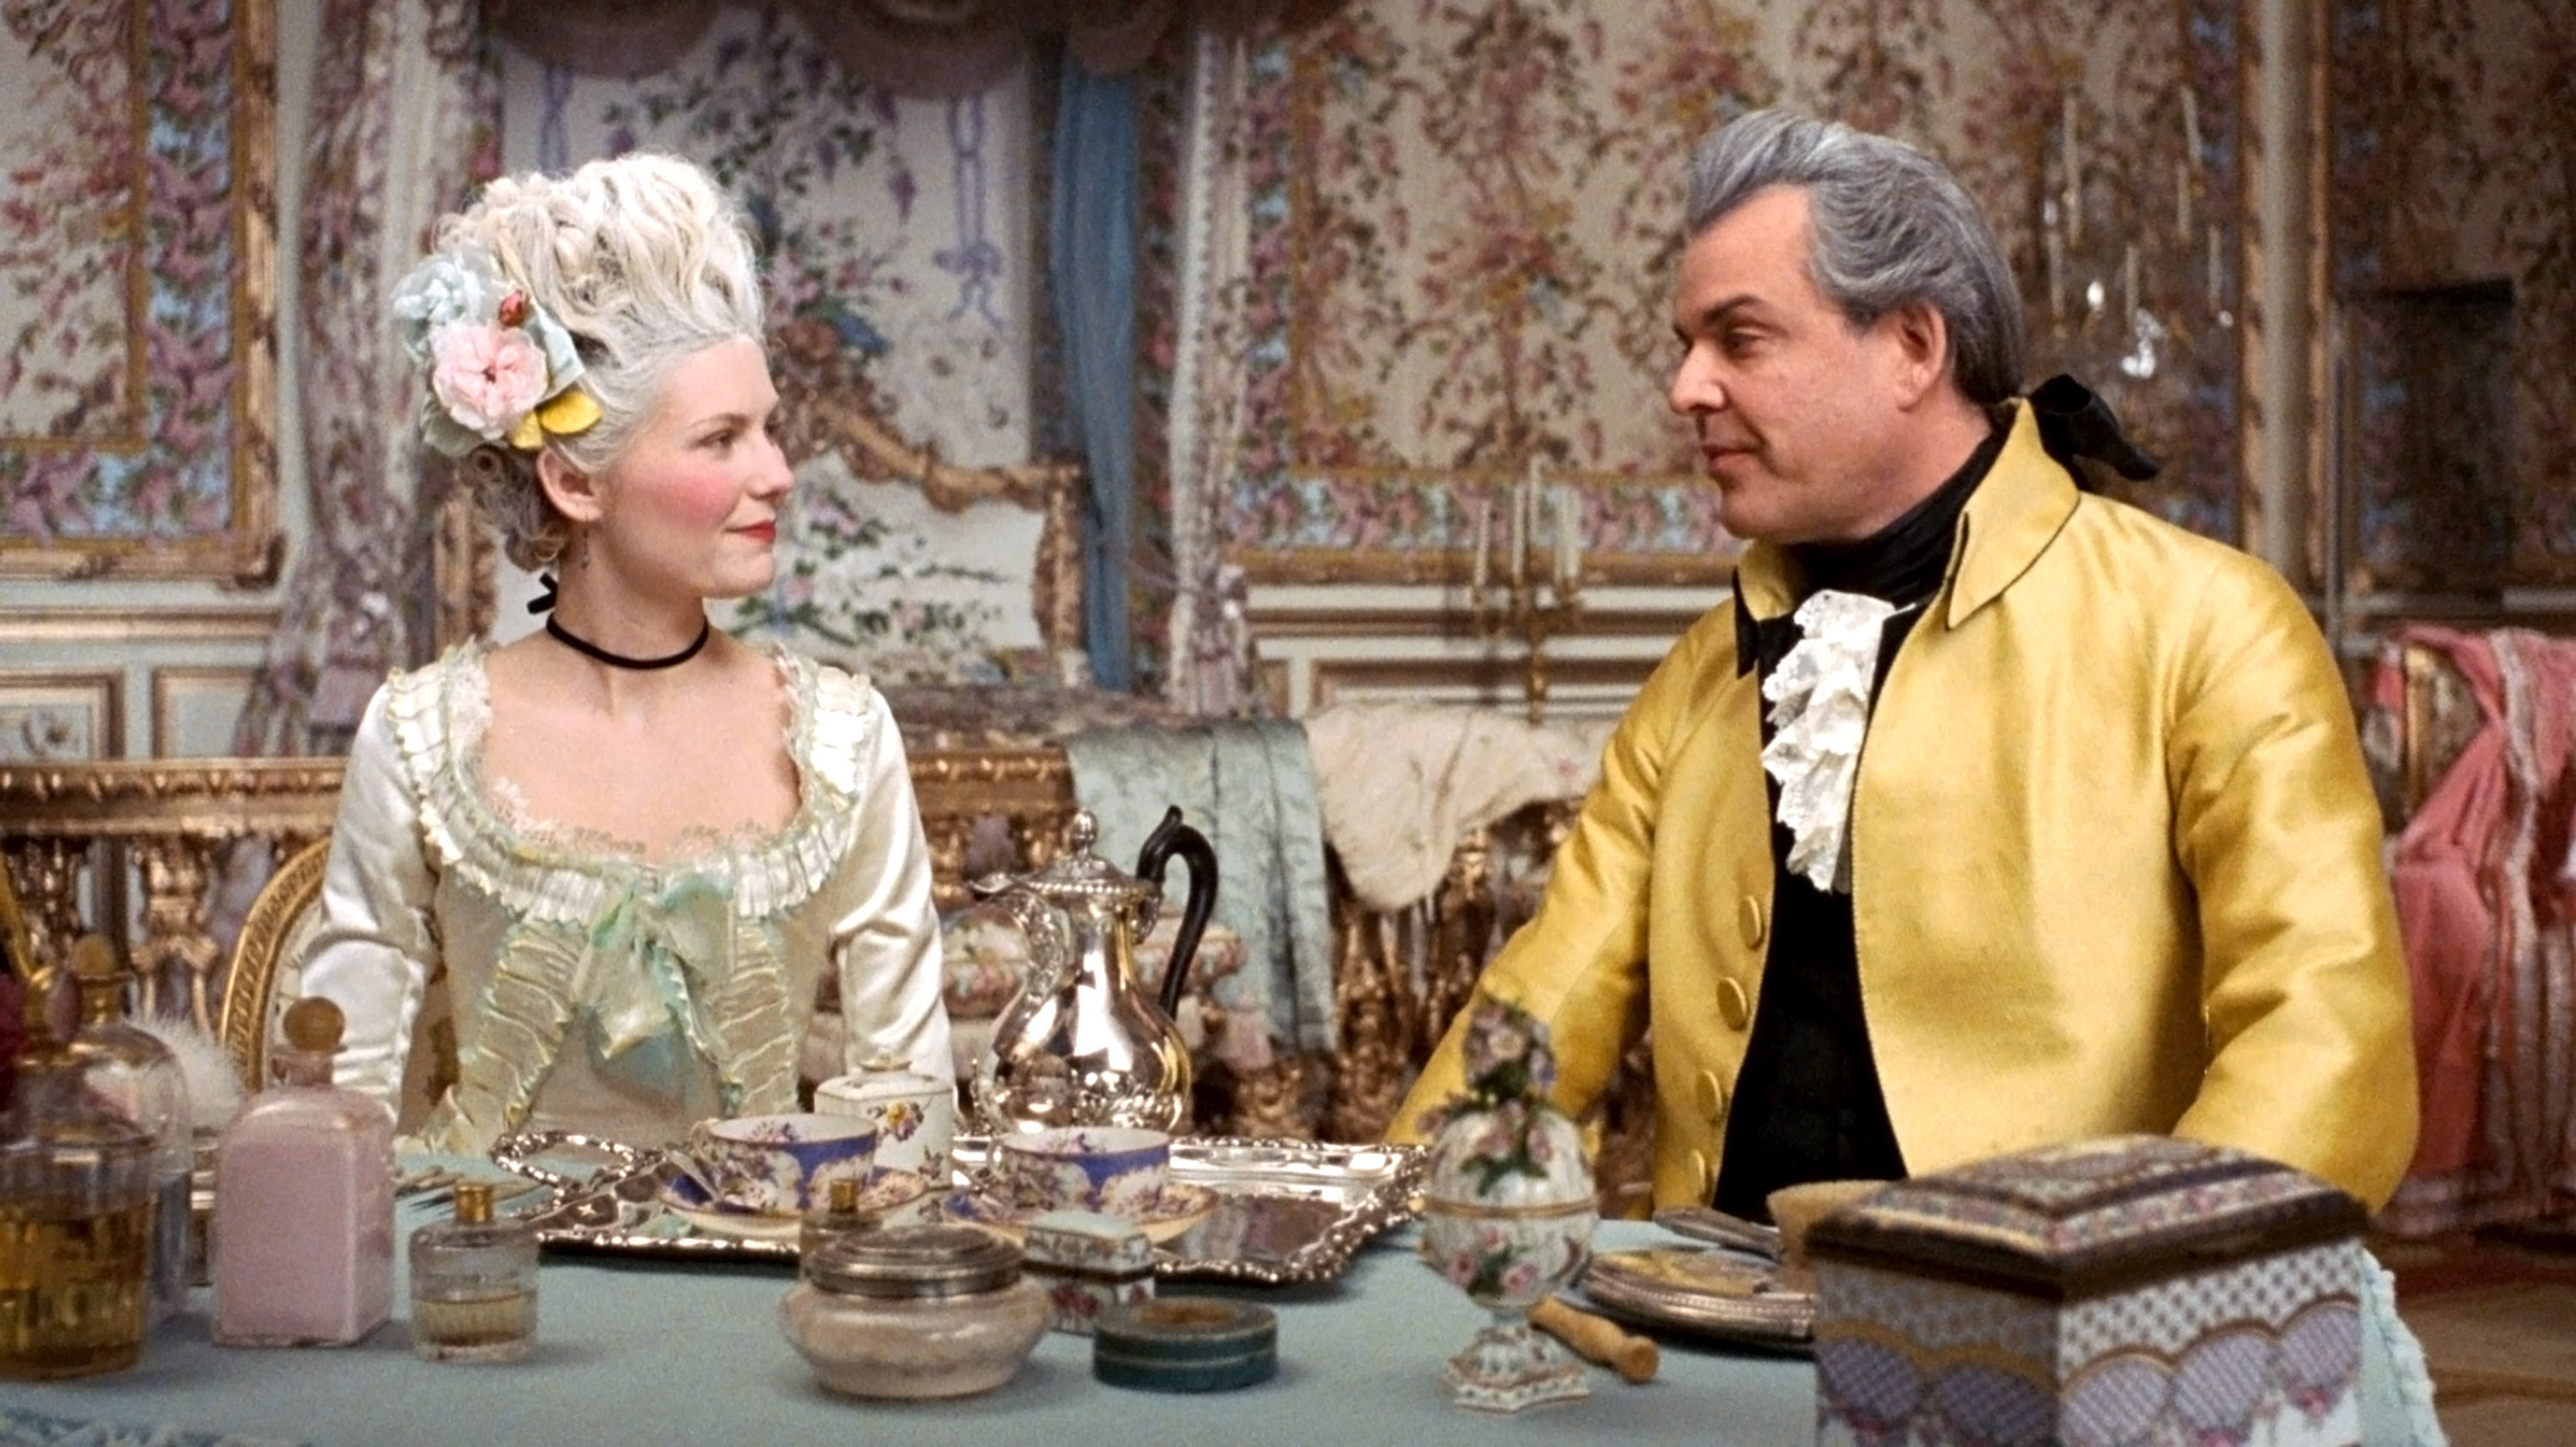 Kirsten Dunst and Danny Huston sit at tea wearing pre-revolution French finery